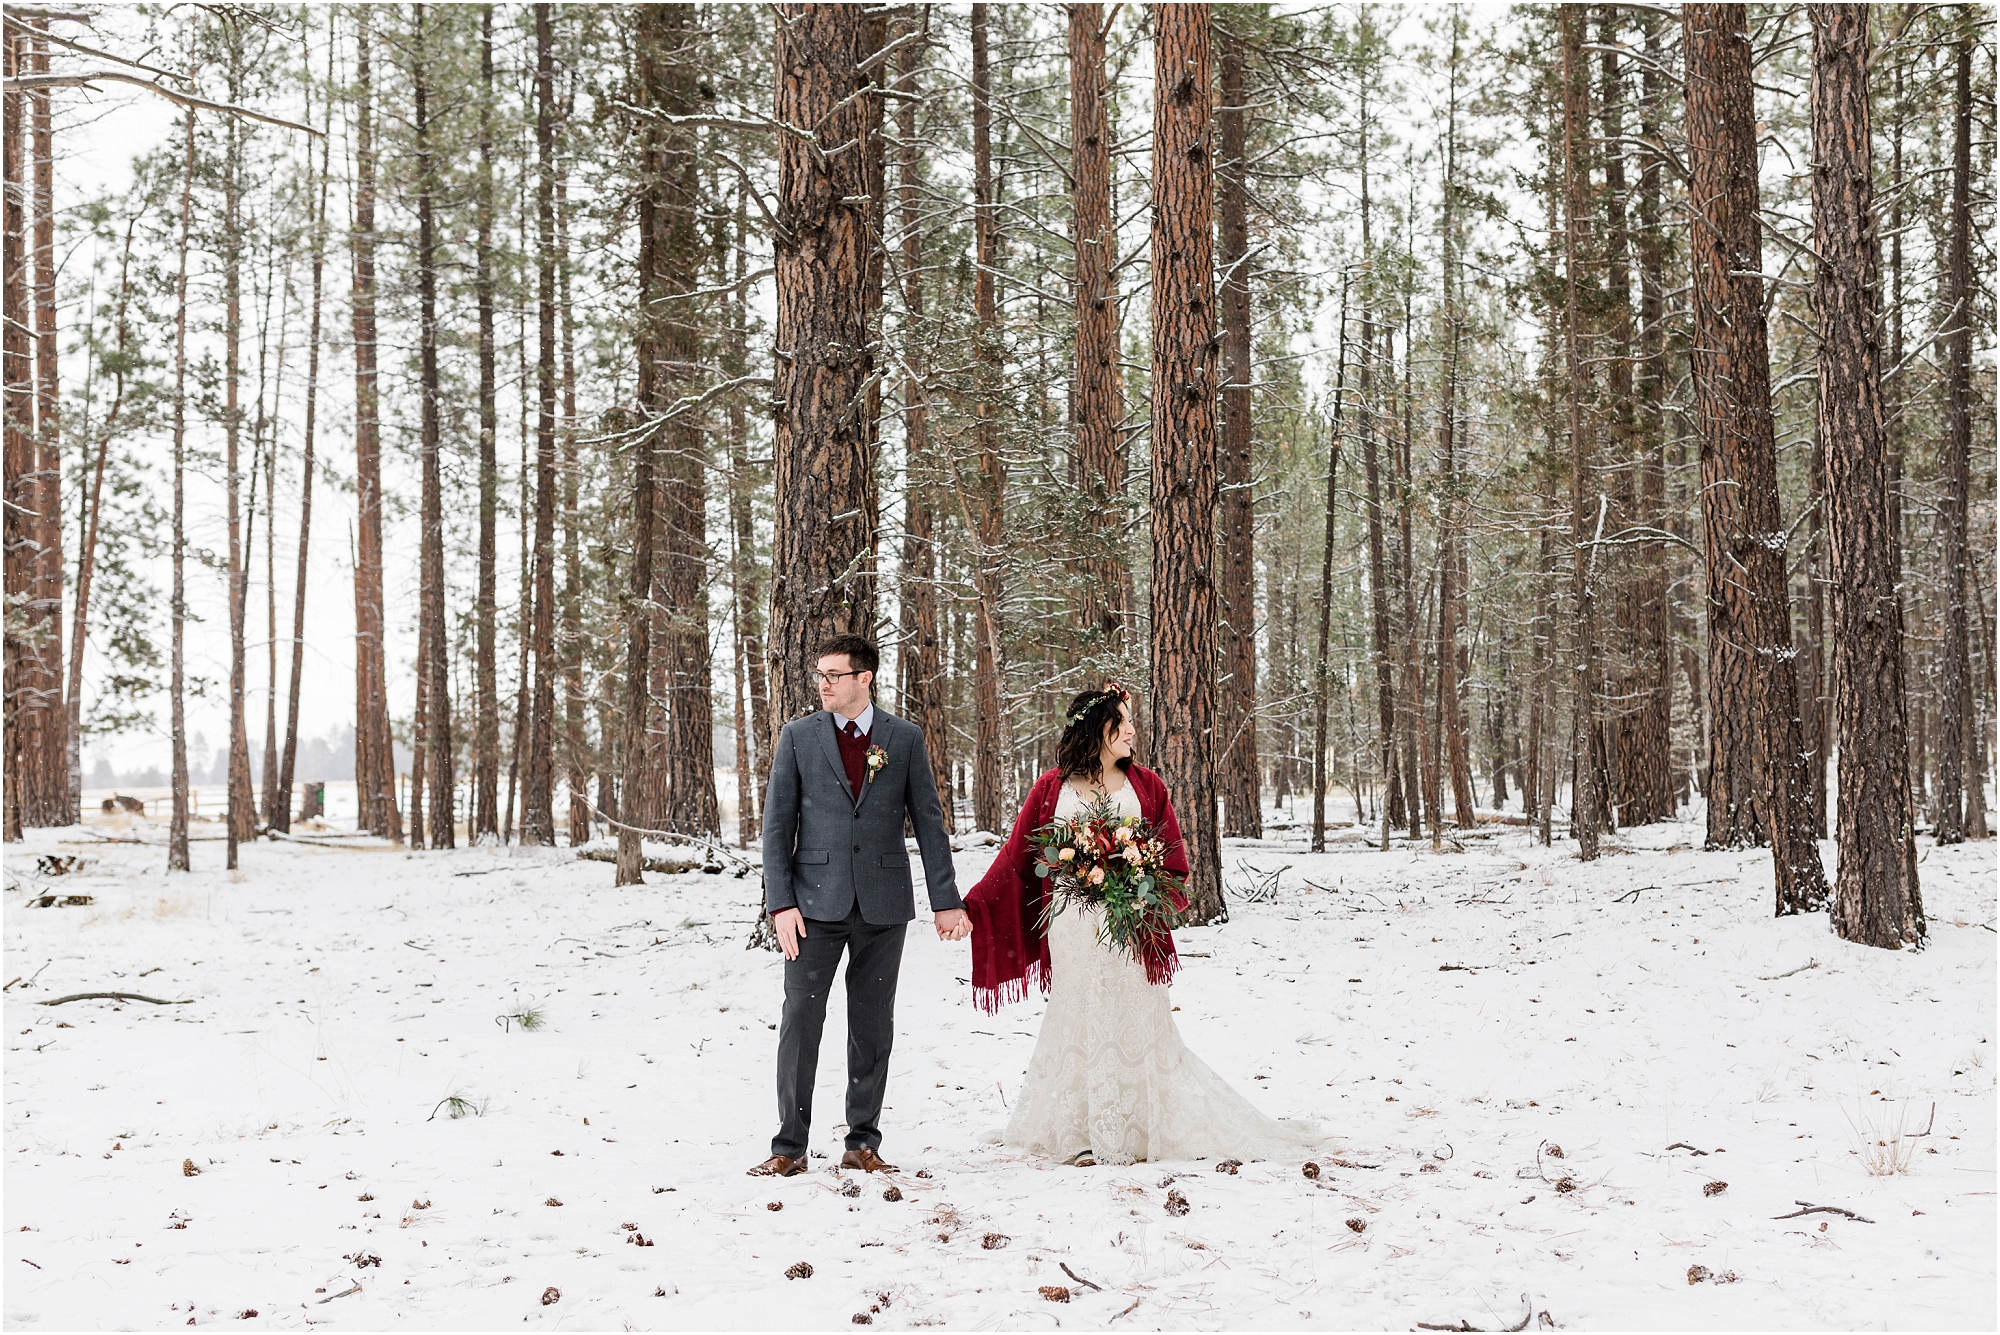 Central Oregon is a winter wonderland for a beautiful wedding or elopement at Five Pine Lodge in Sisters. | Erica Swantek Photography